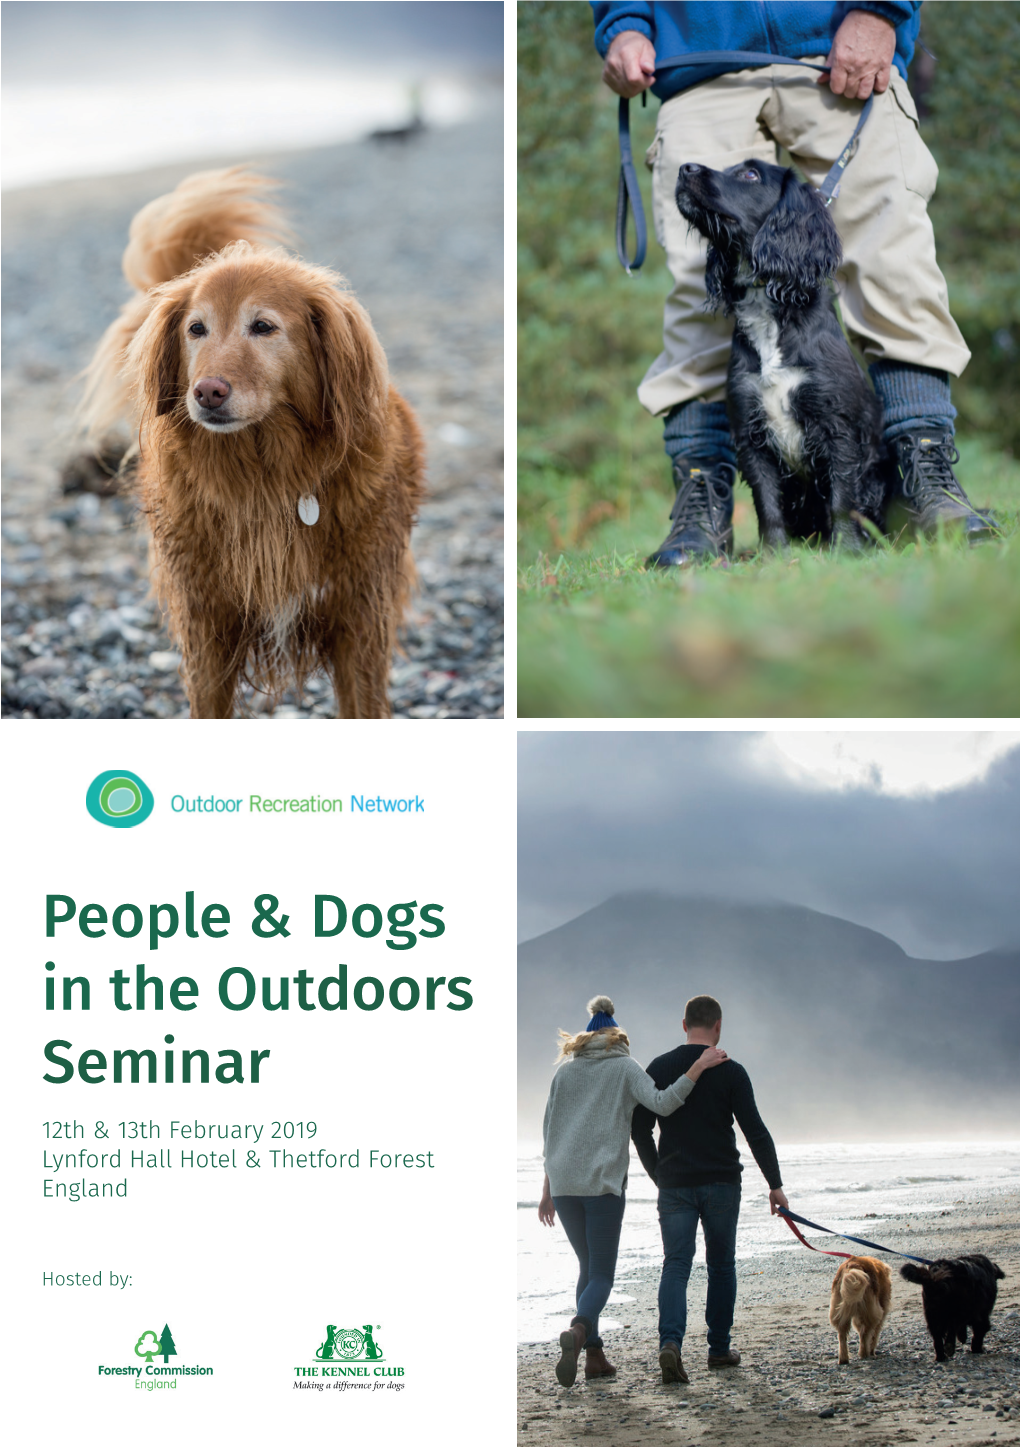 People & Dogs in the Outdoors Seminar